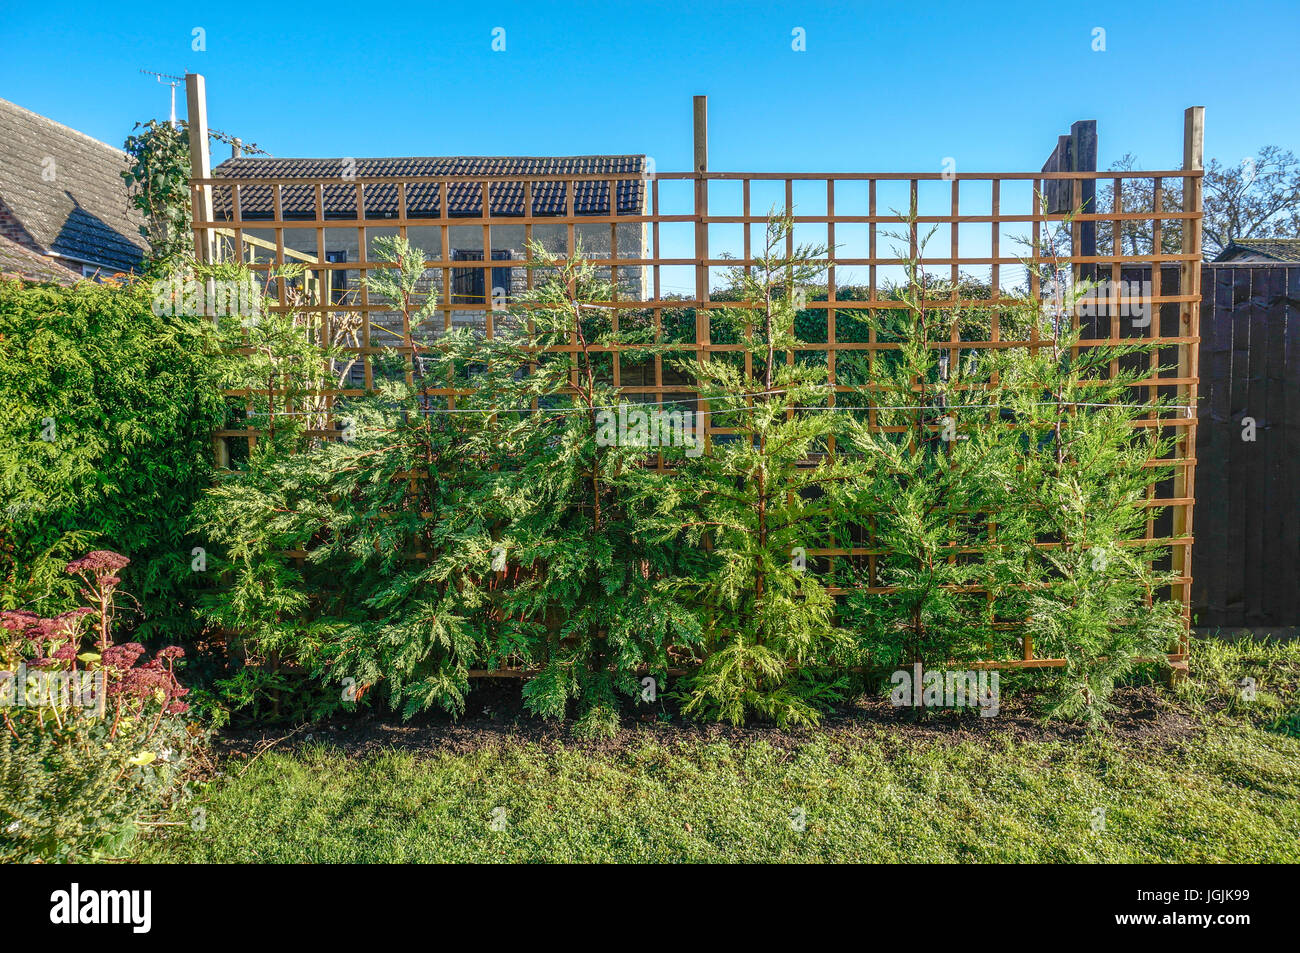 A row of newly planted Leylandii conifers, supported against wooden trellis, in a sunny garden, against a clear blue sky.  England, UK. Stock Photo